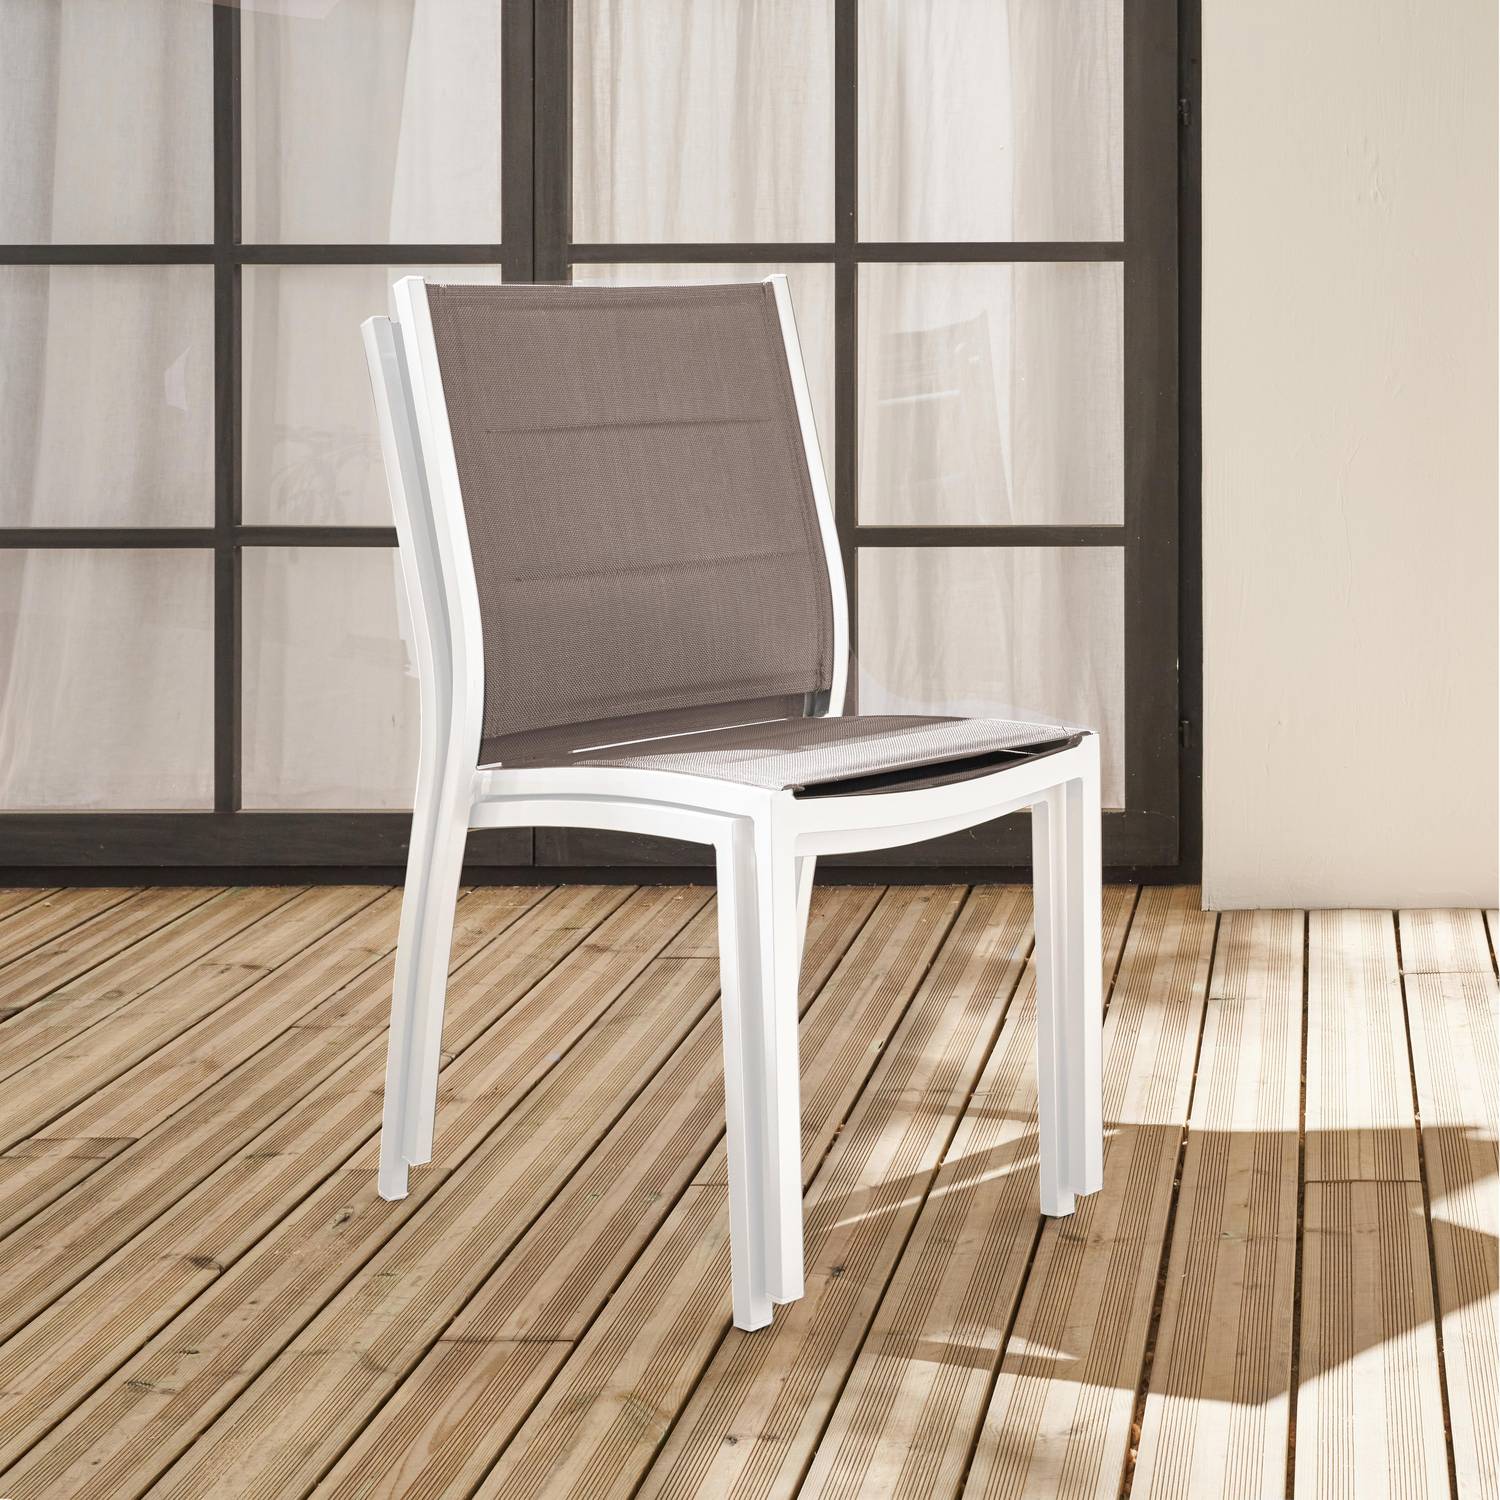 Set of 2 stackable chairs - Chicago - White aluminium and Beige-Brown textilene Photo2